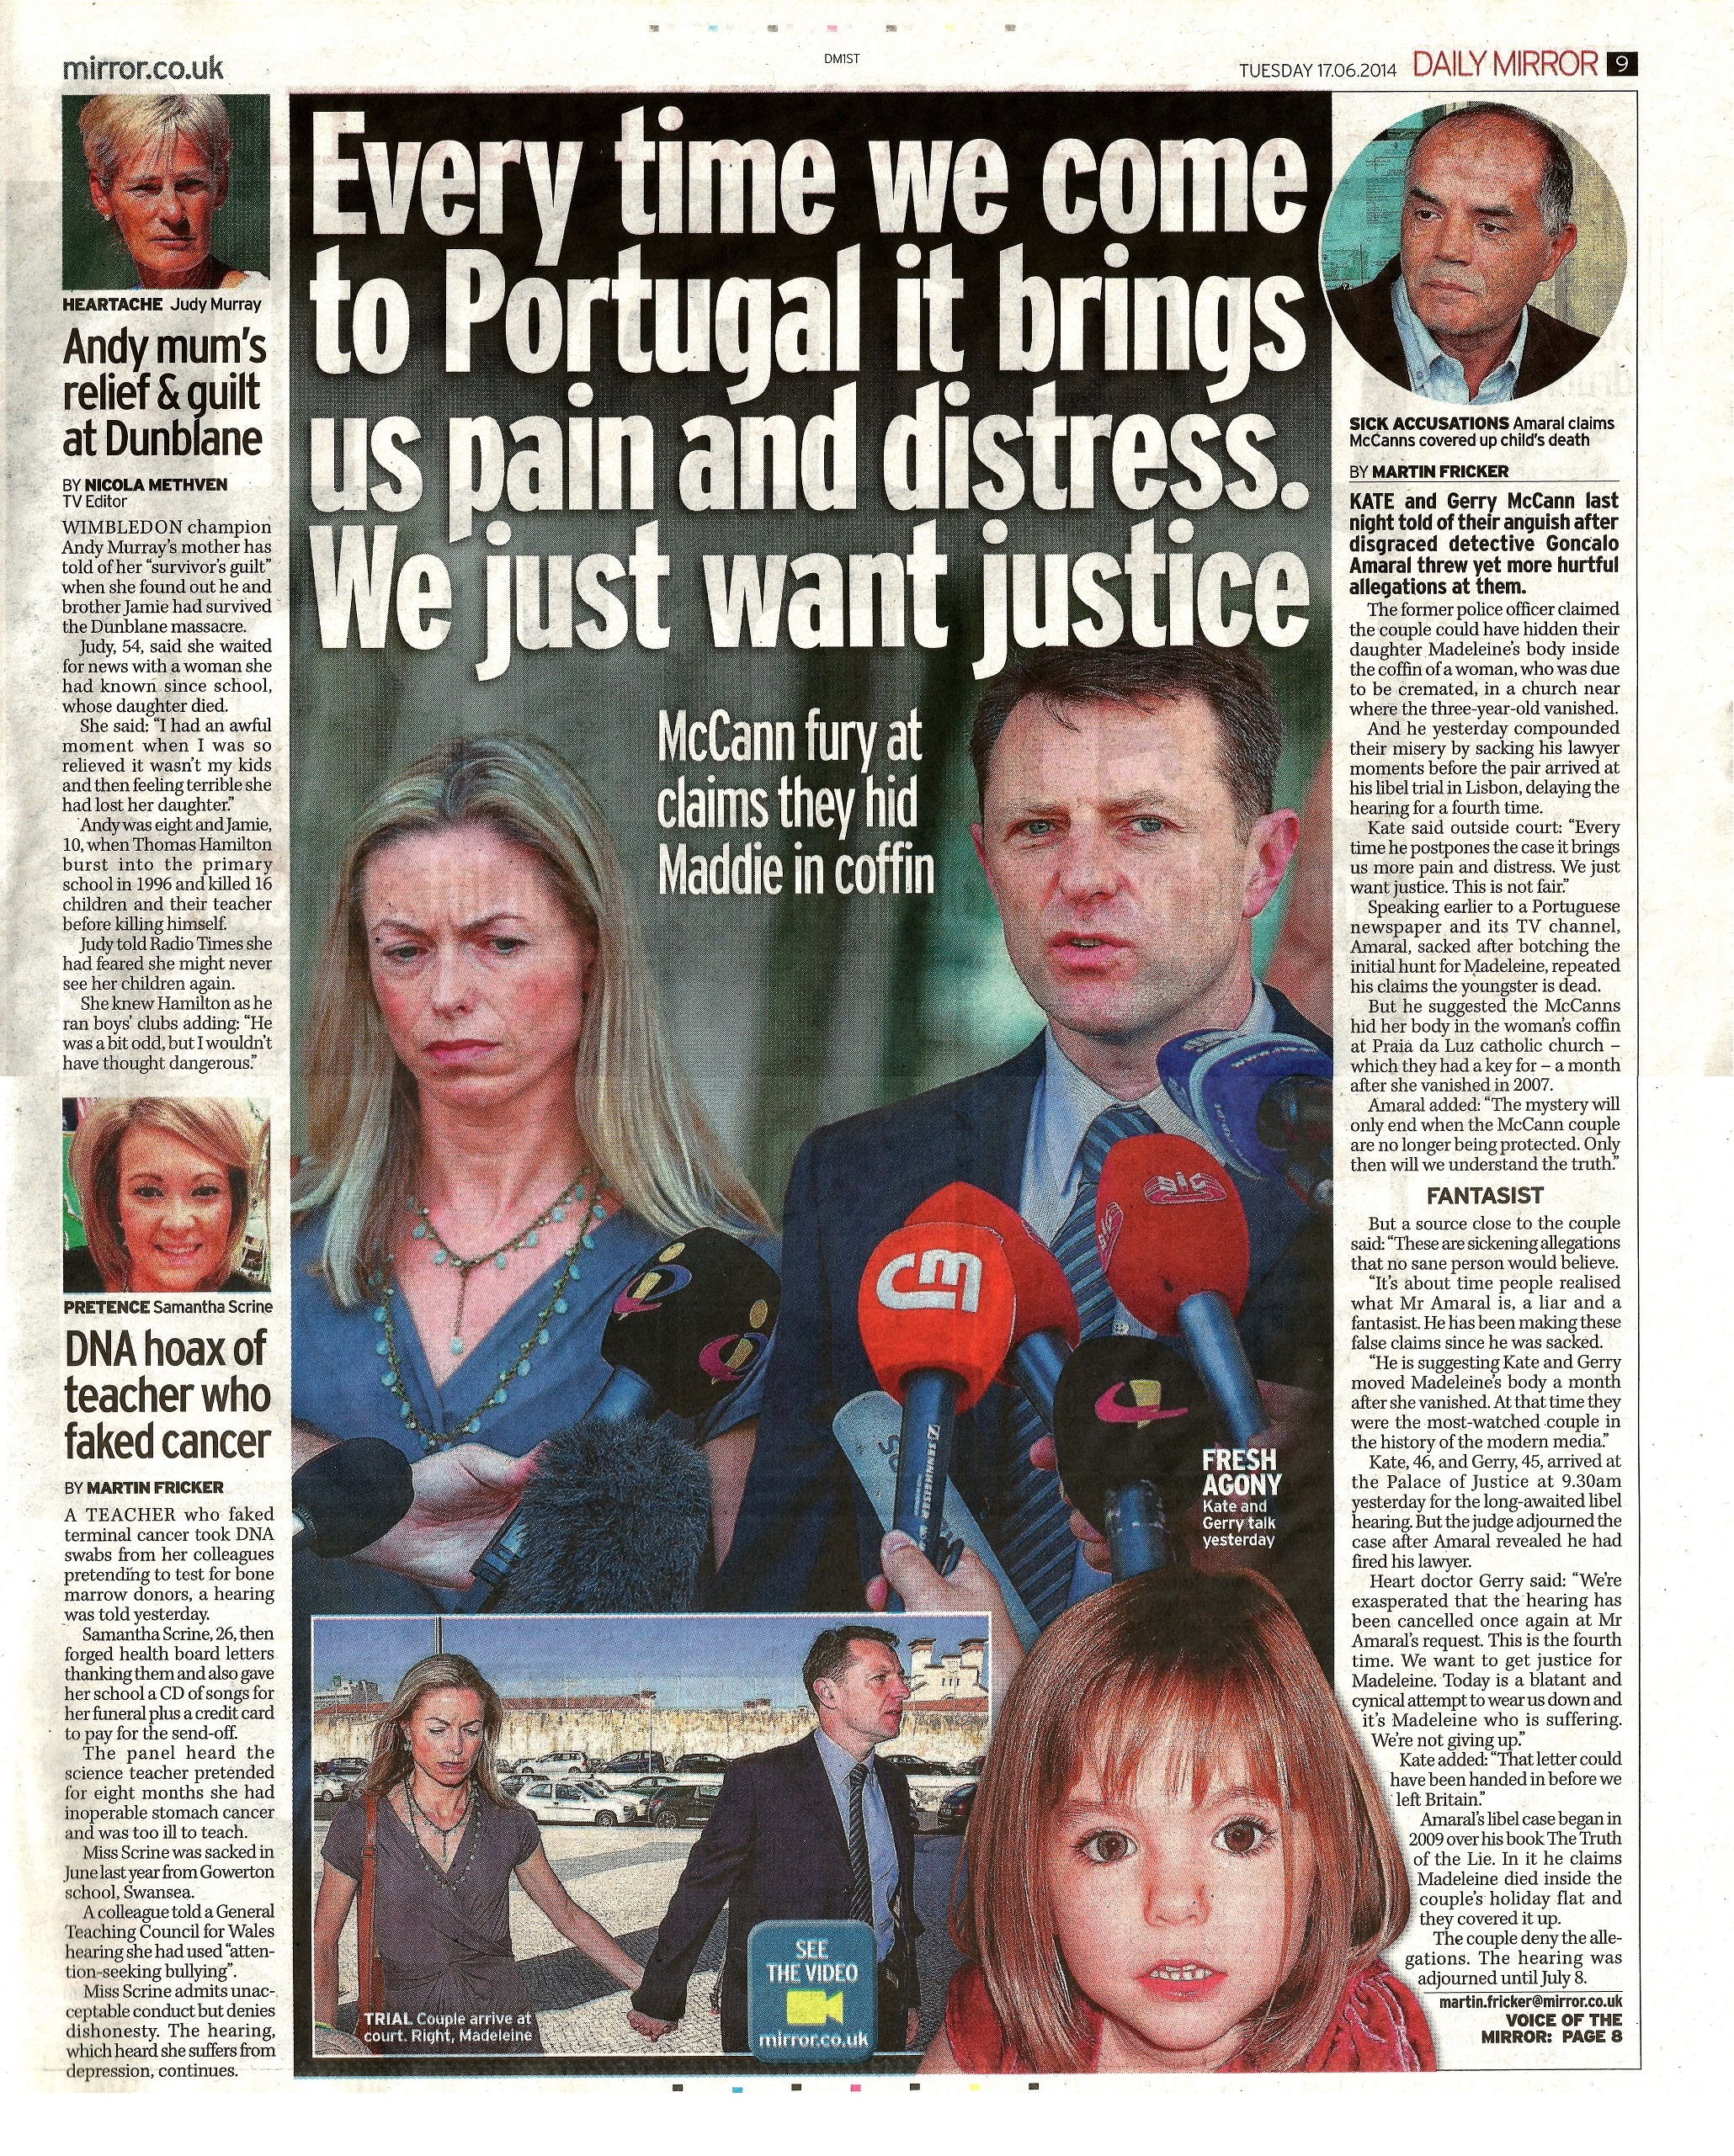 Every time we come to Portugal it brings us pain and distress. We want justice - Daily Mirror, 17 June 2014 (paper edition, page 9)